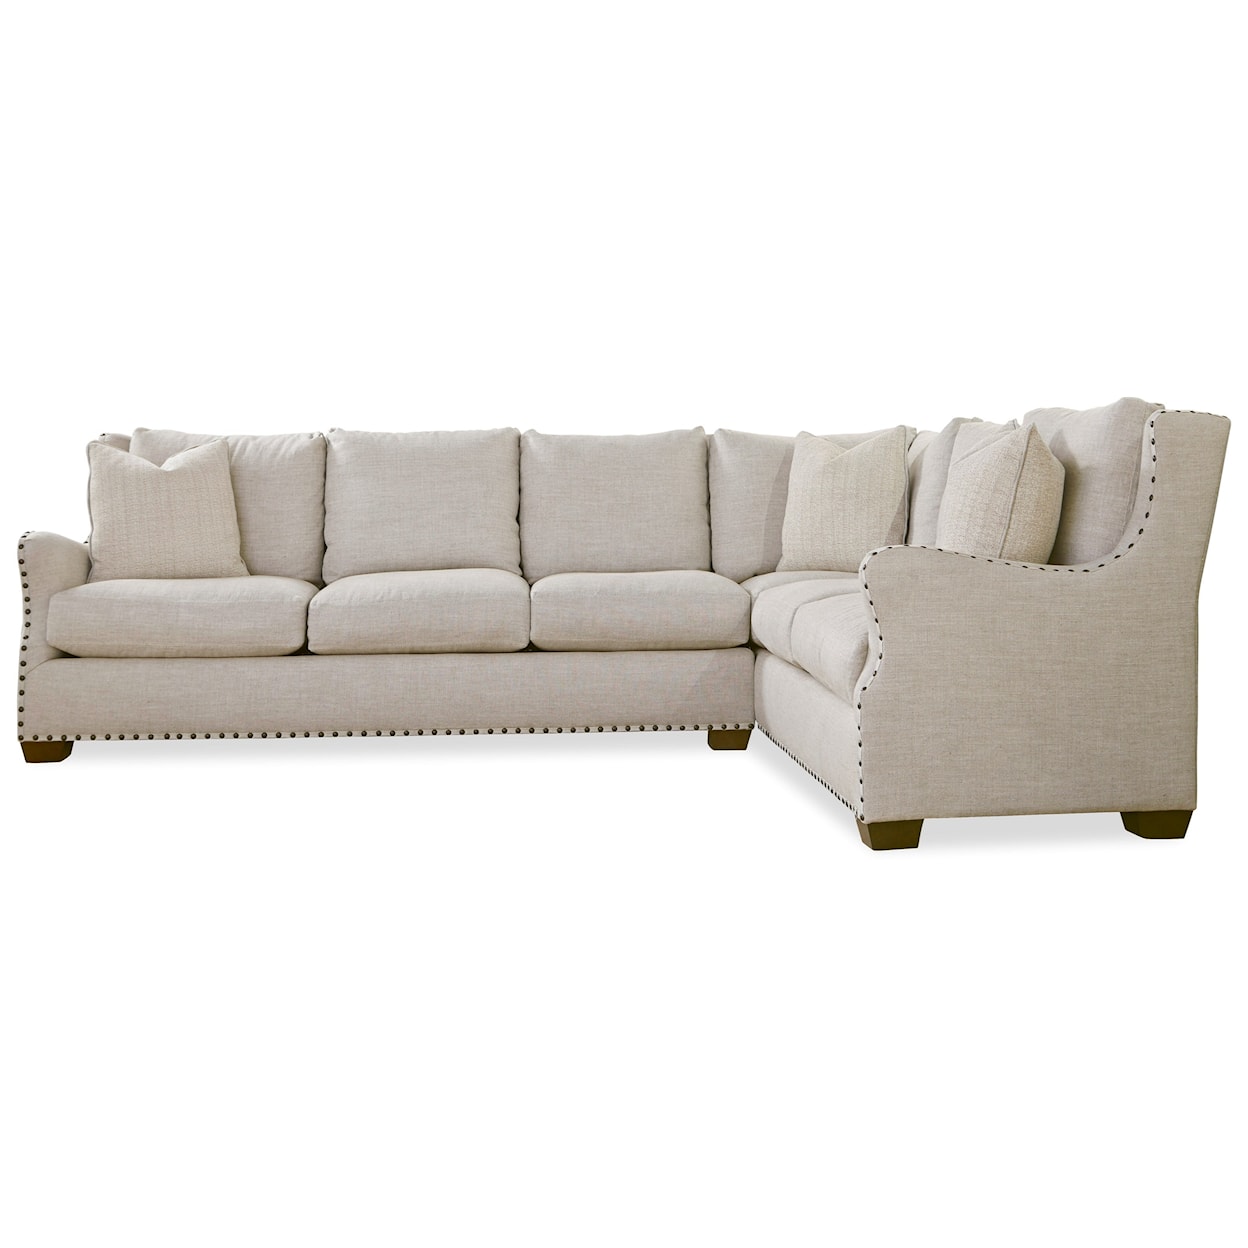 Universal Connor Sectional Sofa